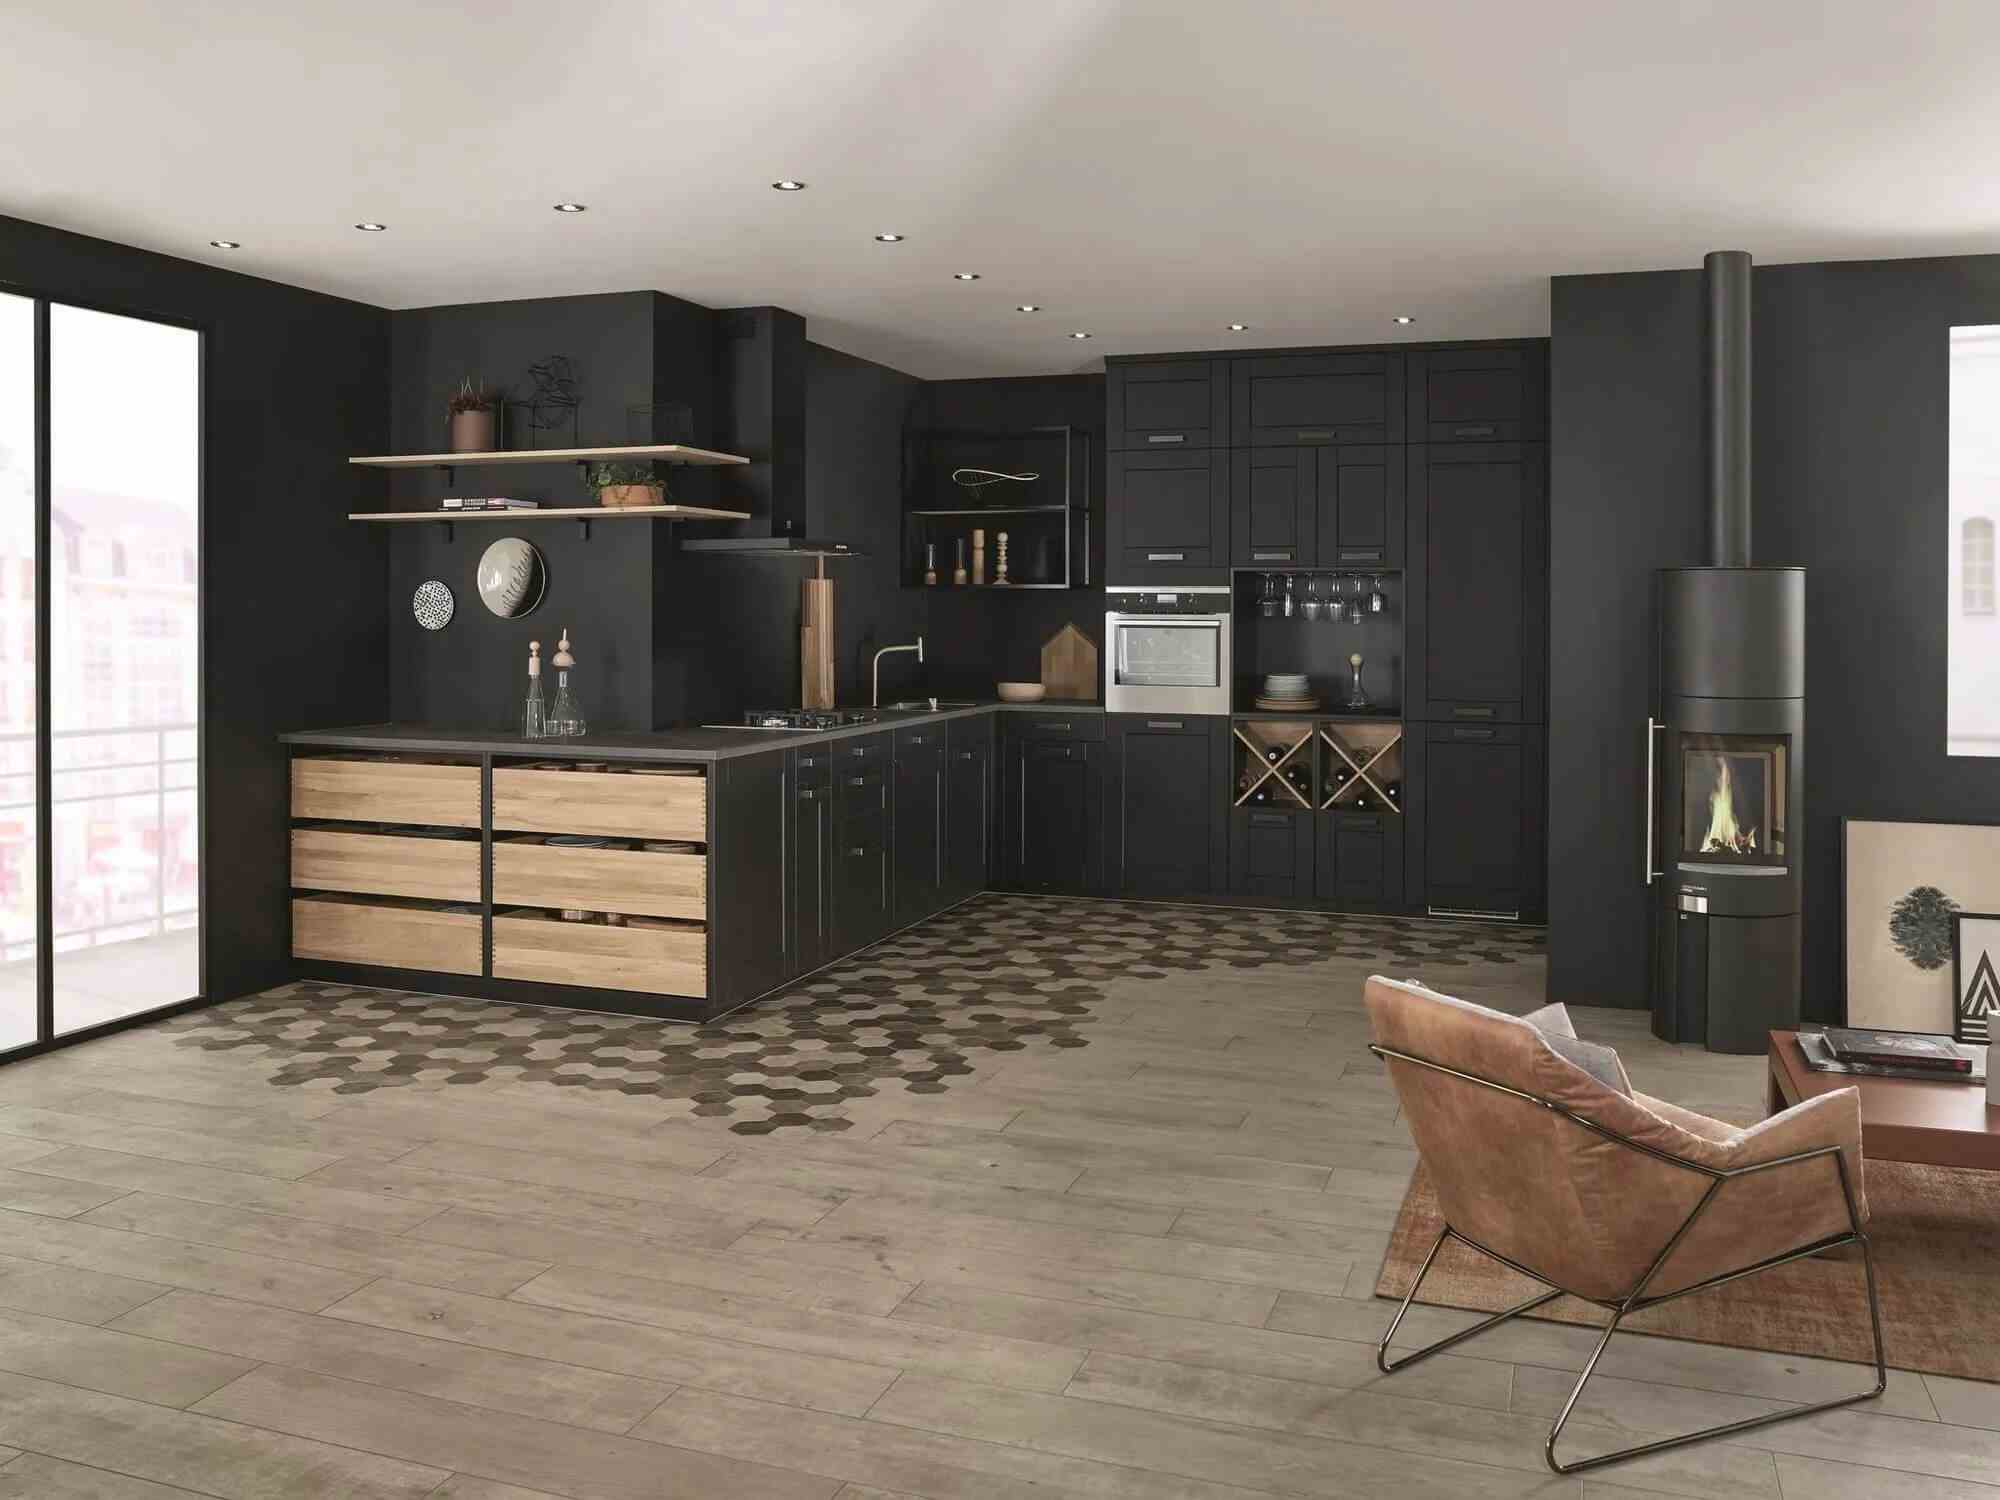 A Kitchen In Black And Wood With A Bistro Spirit 